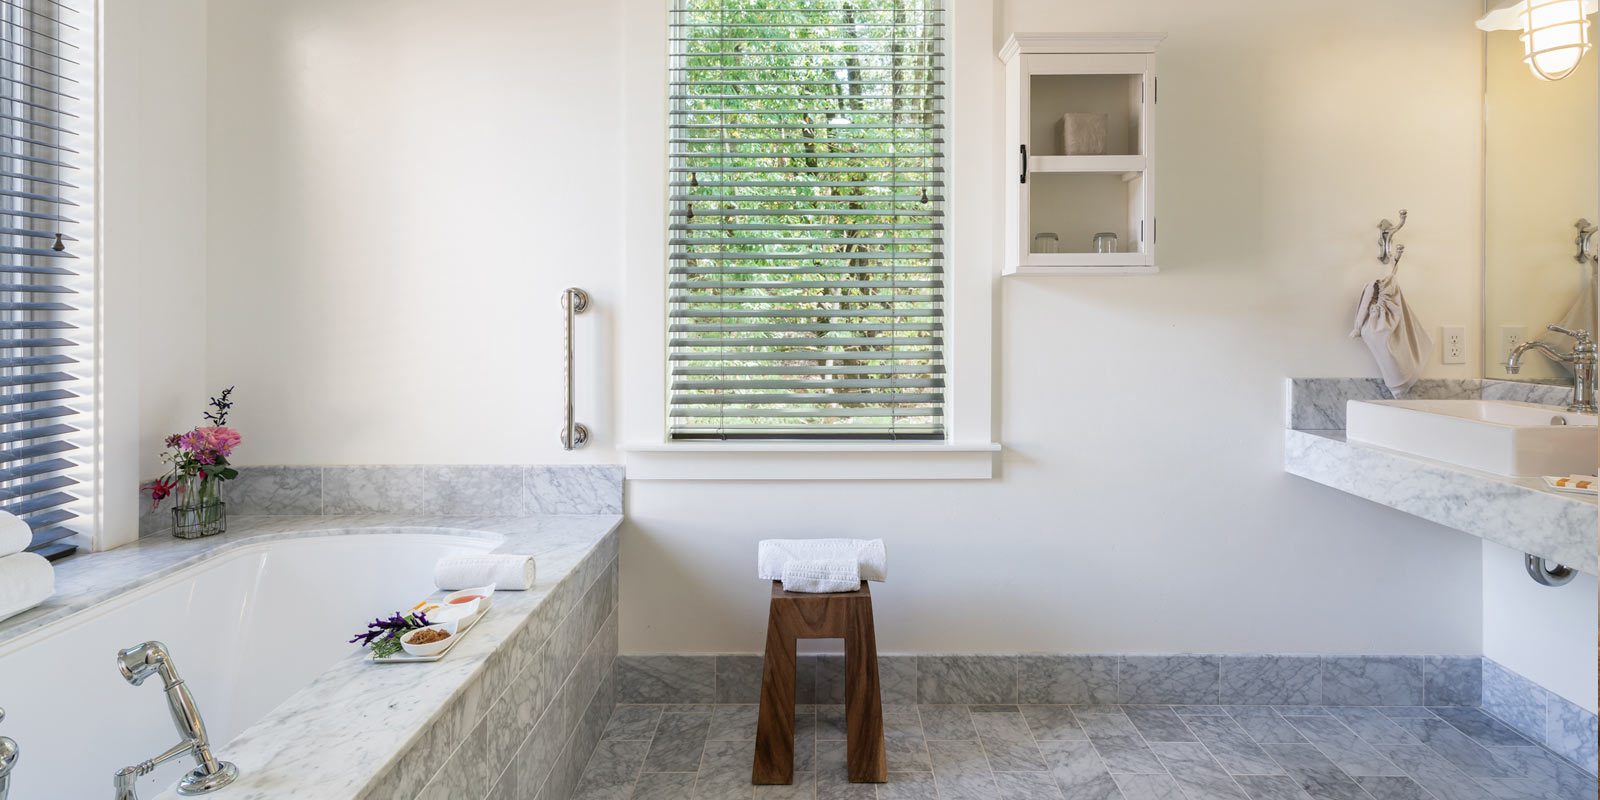 interior of large, elegant bathroom: gray tiled bathtub, matching tiled floors, large vertical glass window, elegant sink and mirror to the right. looking out to greenery,